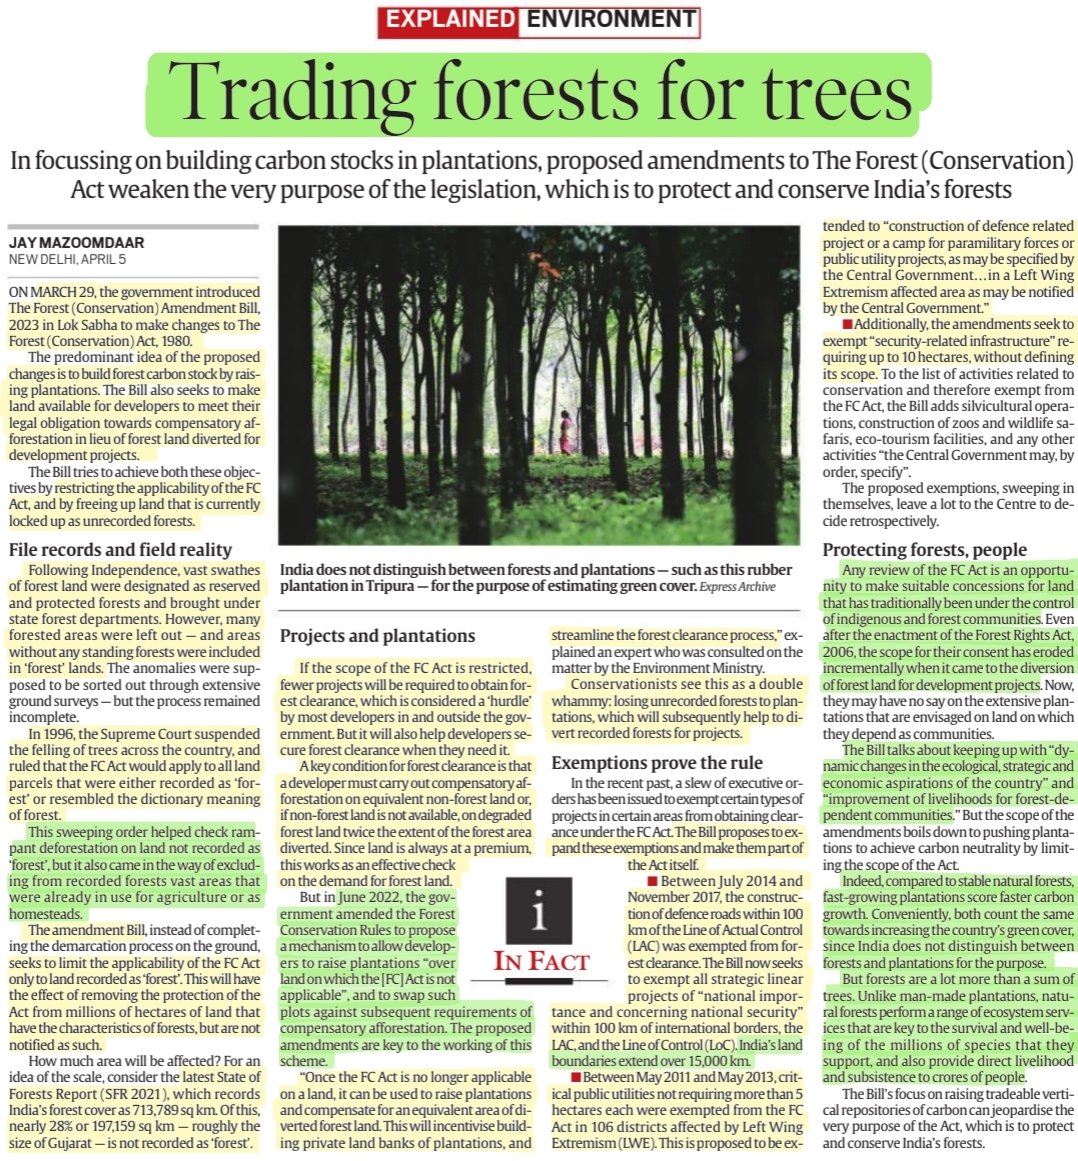 'Trading Forests for Trees'
Proposed amendments to the Forest (Conservation) Act
:Details

#Forests #conservation #ForestAct #ForestProtection
#trees #CarbonStock #Plantations #development #CarbonFootprint 
#ClimateAction #green

#UPSC #UPSC2023 #upscaspirants 

Source: IE